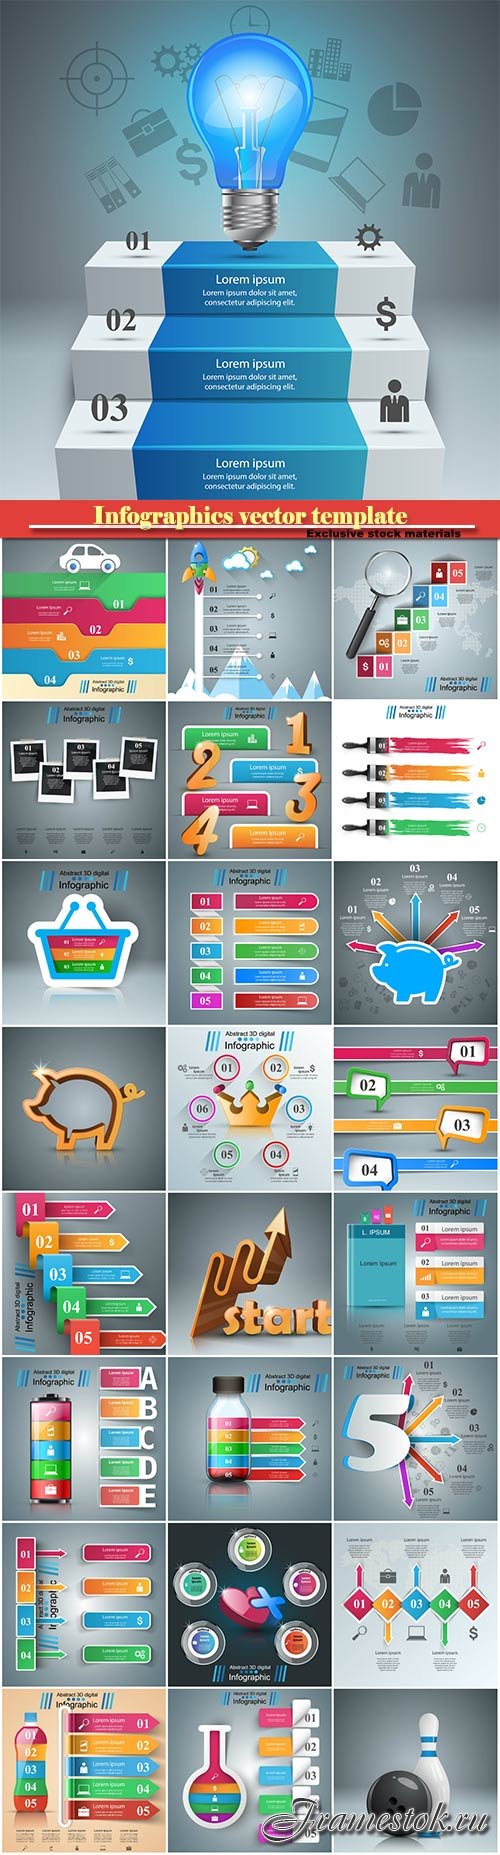 Infographics vector template for business presentations or information banner # 14